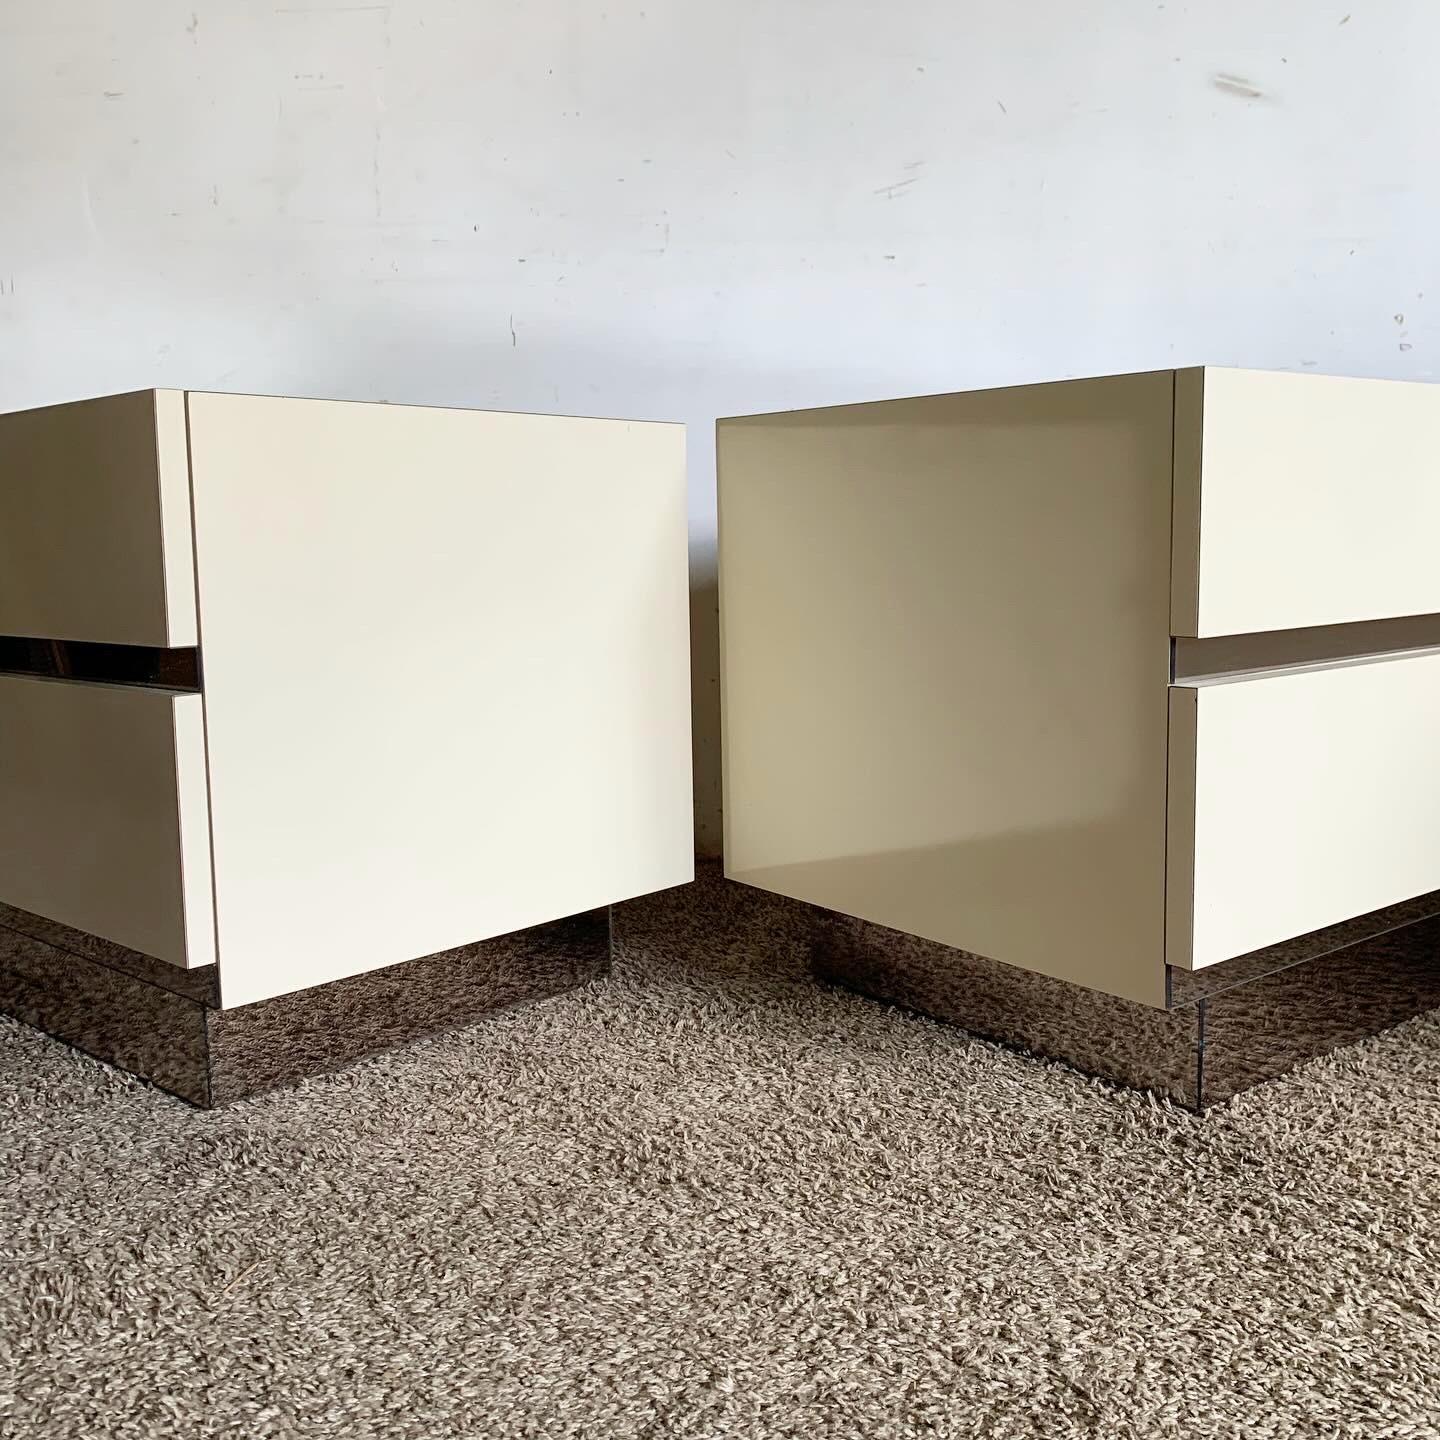 Late 20th Century Postmodern Cream Lacquer Laminate With Glass Mirror Paneling - a Pair For Sale